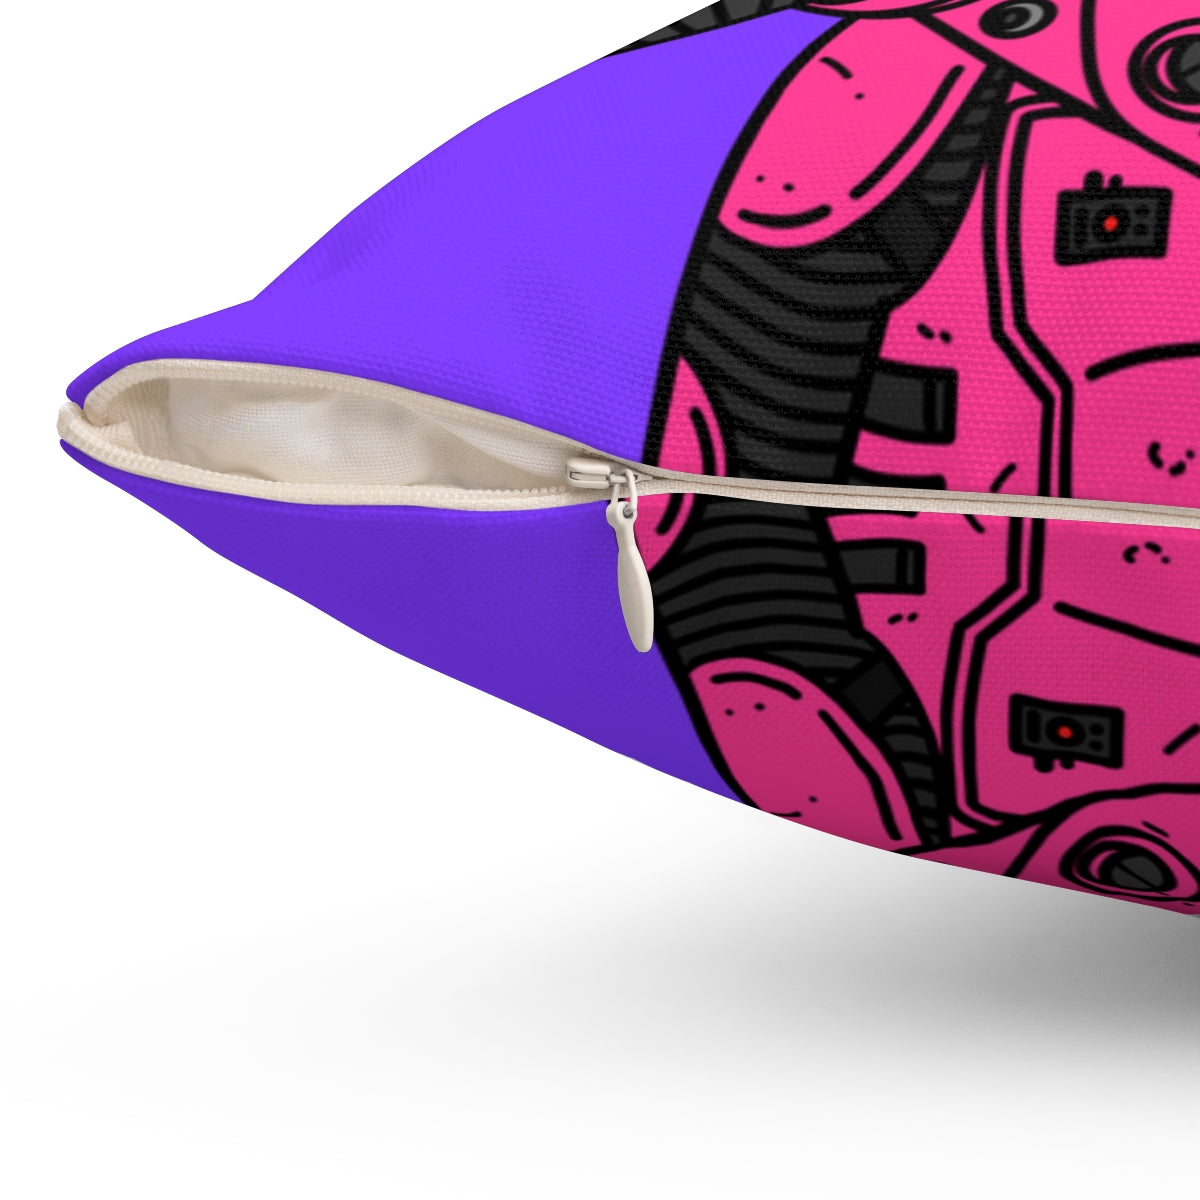 Armored Pink Future Alien Cyborg Machine Visitor Spun Polyester Square Pillow